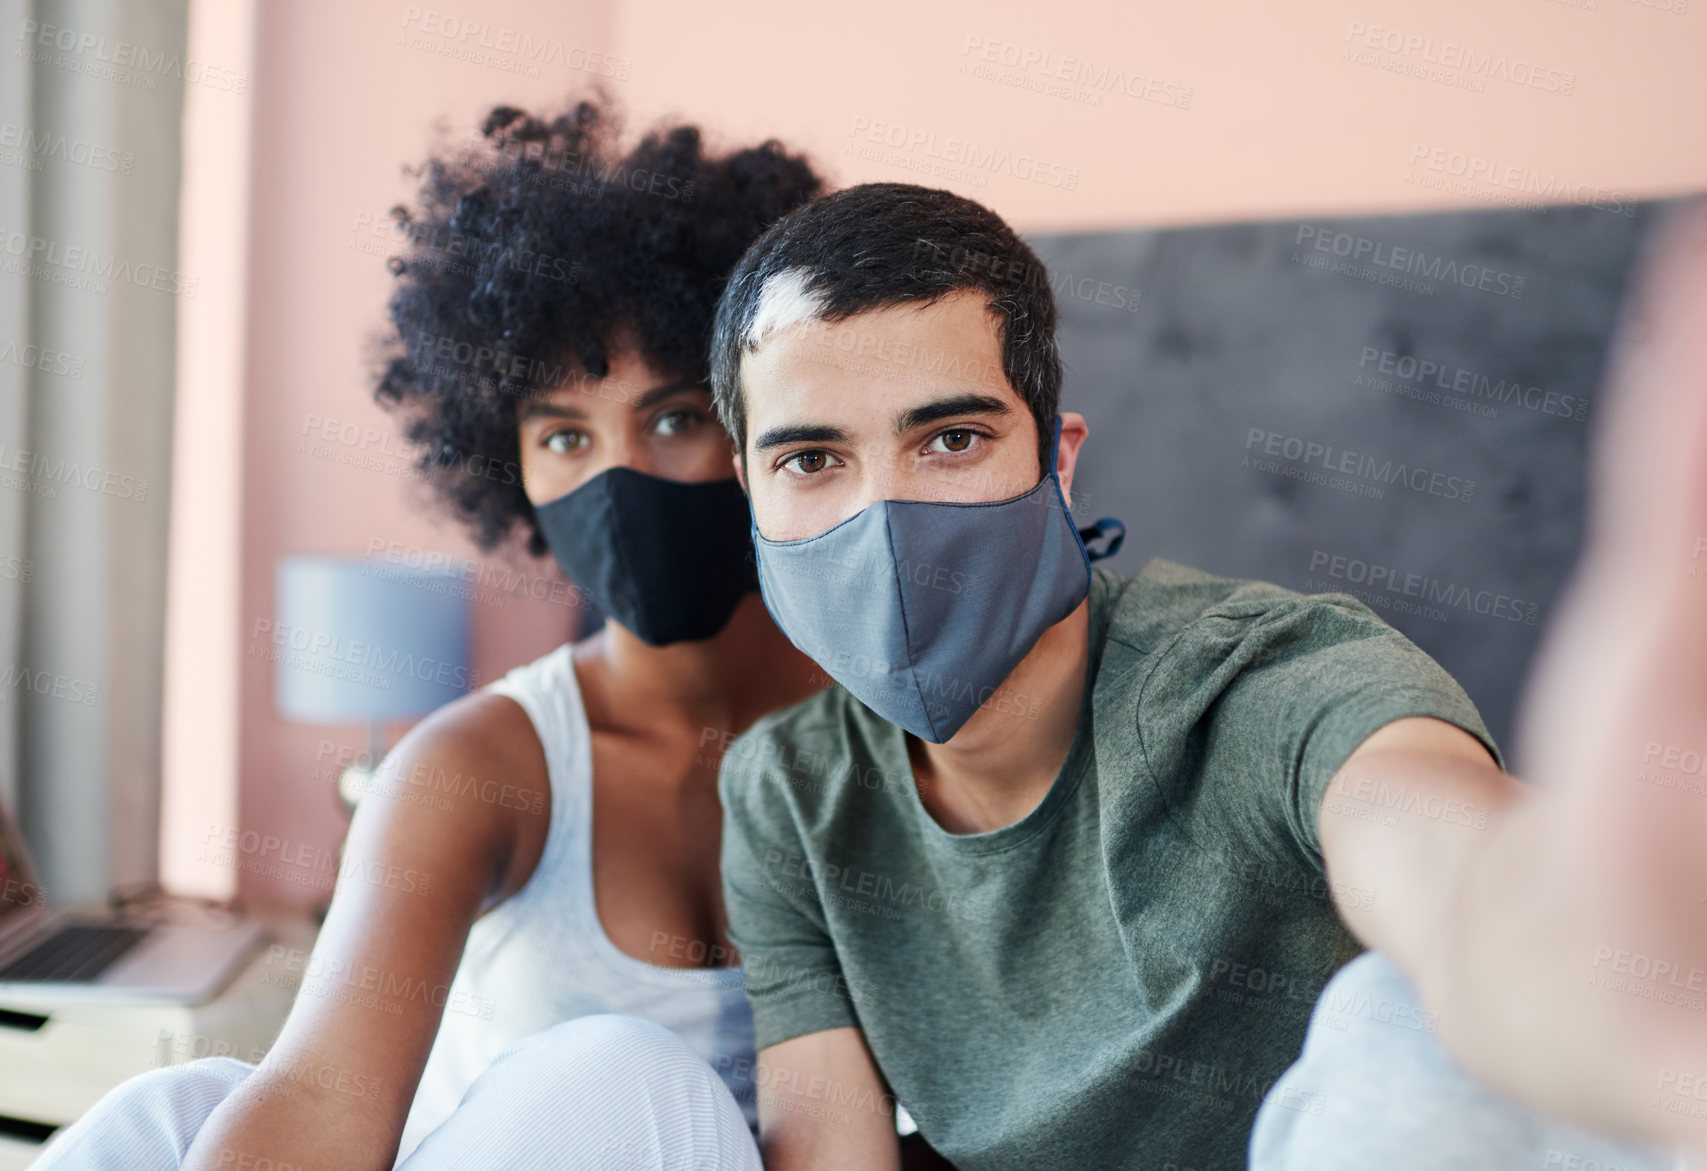 Buy stock photo Cropped shot of a young couple taking a selfie while wearing their masks